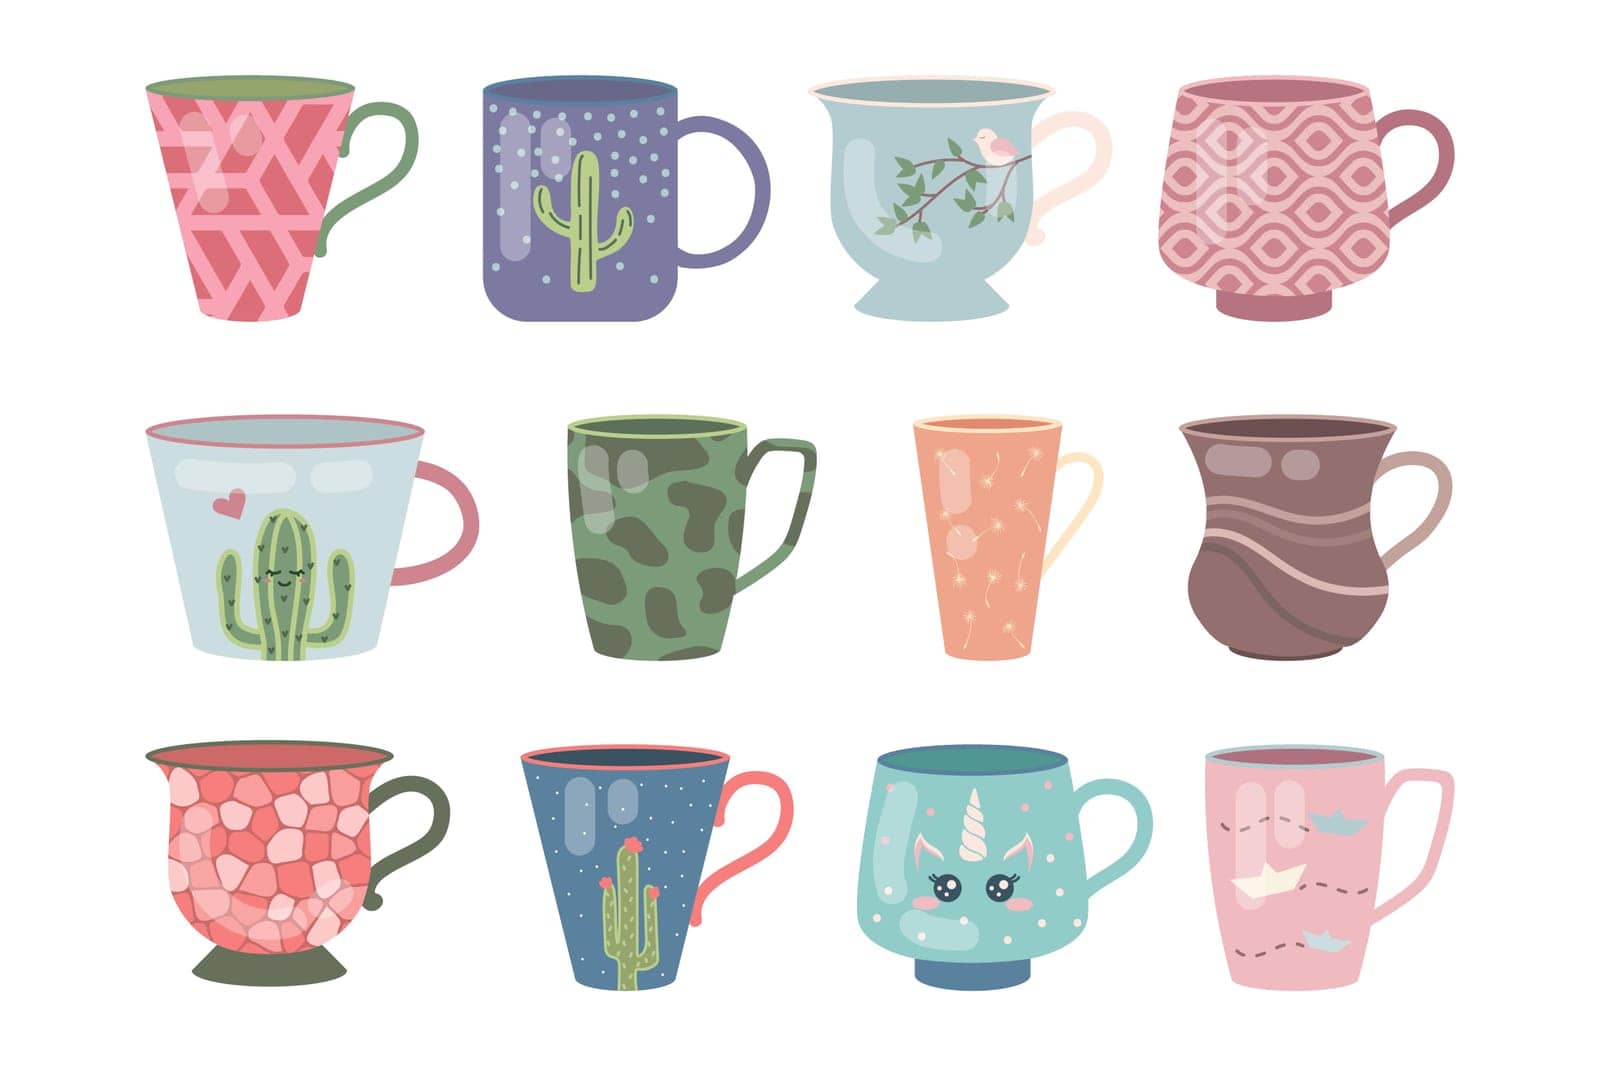 Modern ceramic or porcelain cups cartoon illustration set. Cute colorful mugs with flowers and doodle pattern for coffee, tea, matcha or different beverages. Crockery for home or cafe, kitchen concept